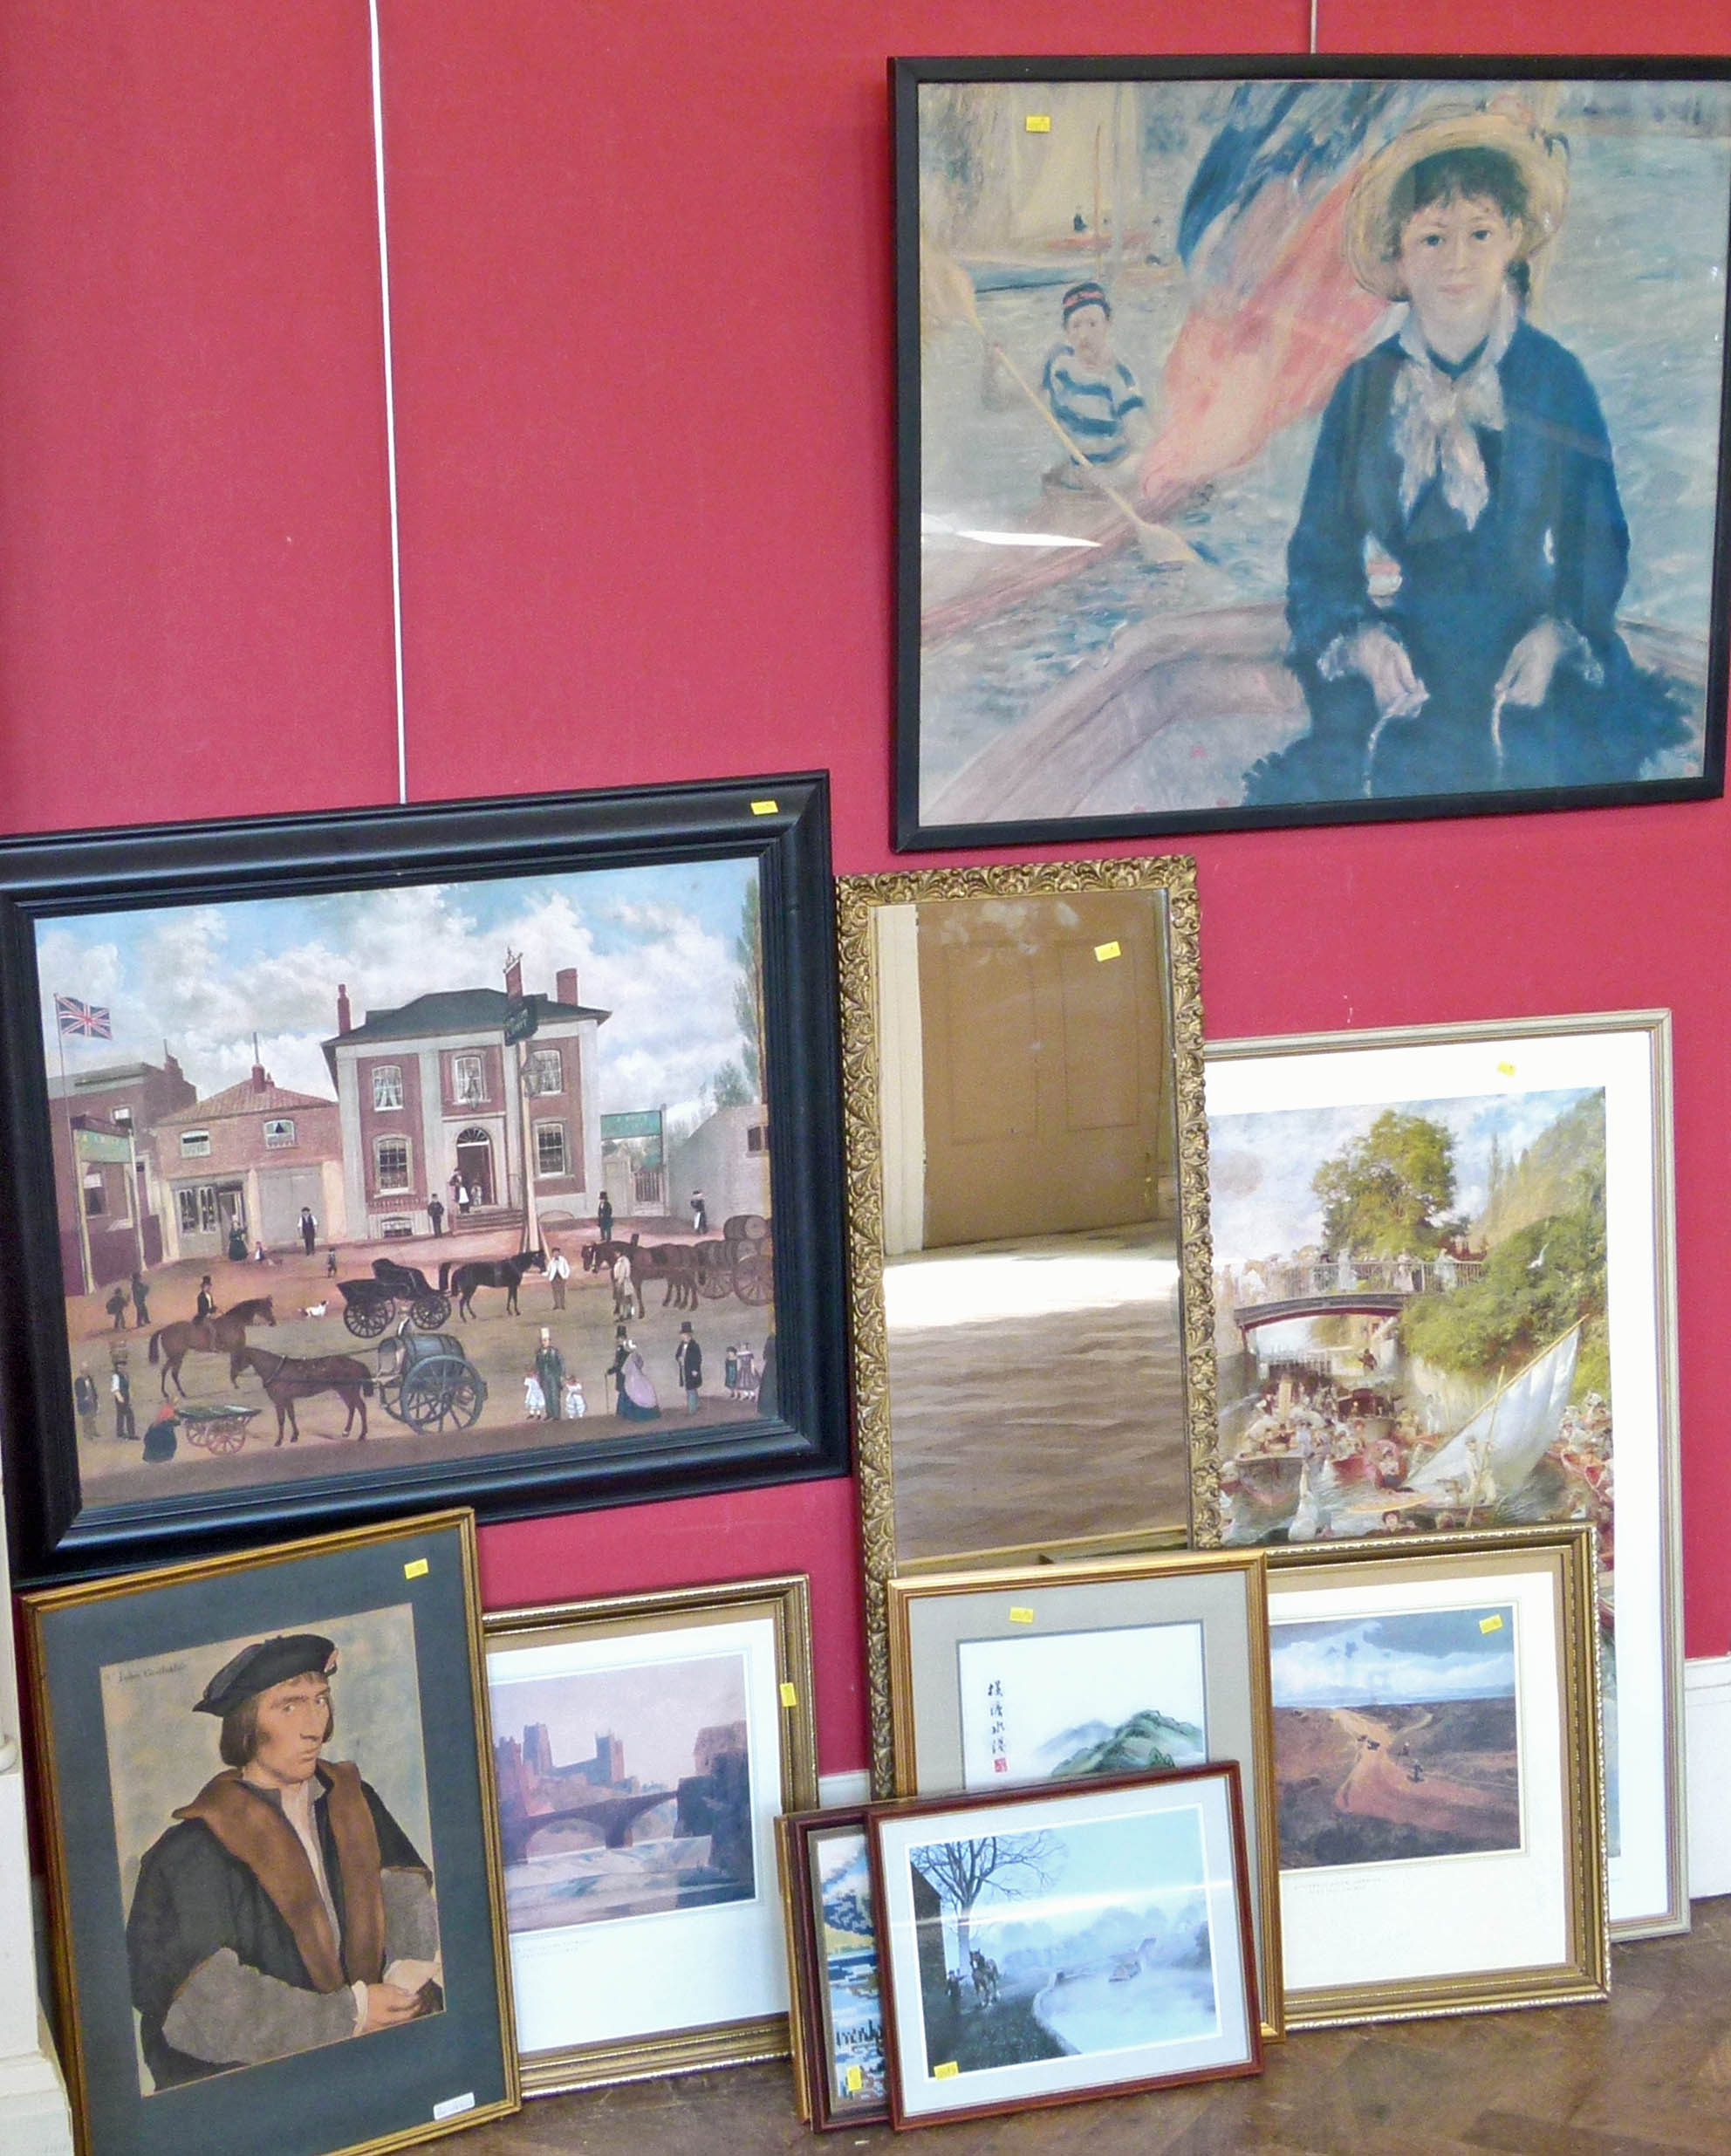 A gilt framed wall mirror, colour print "Boulter's Lock", "Sunday Afternoon" and various other